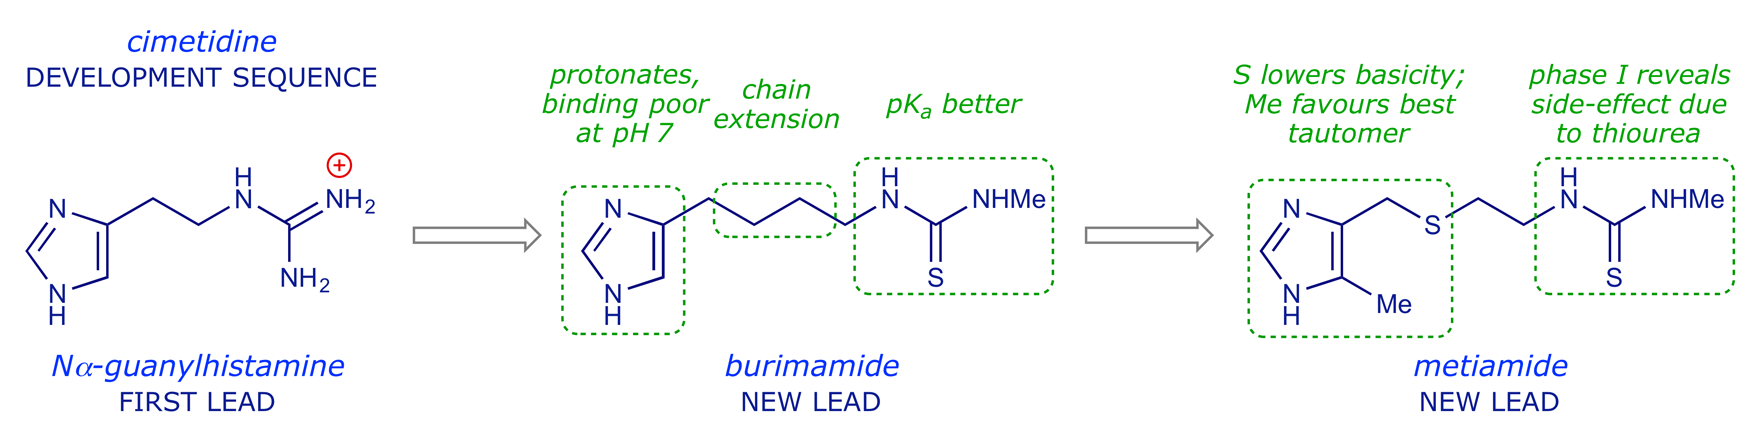 Structures of lead compounds during the development of cimetidine